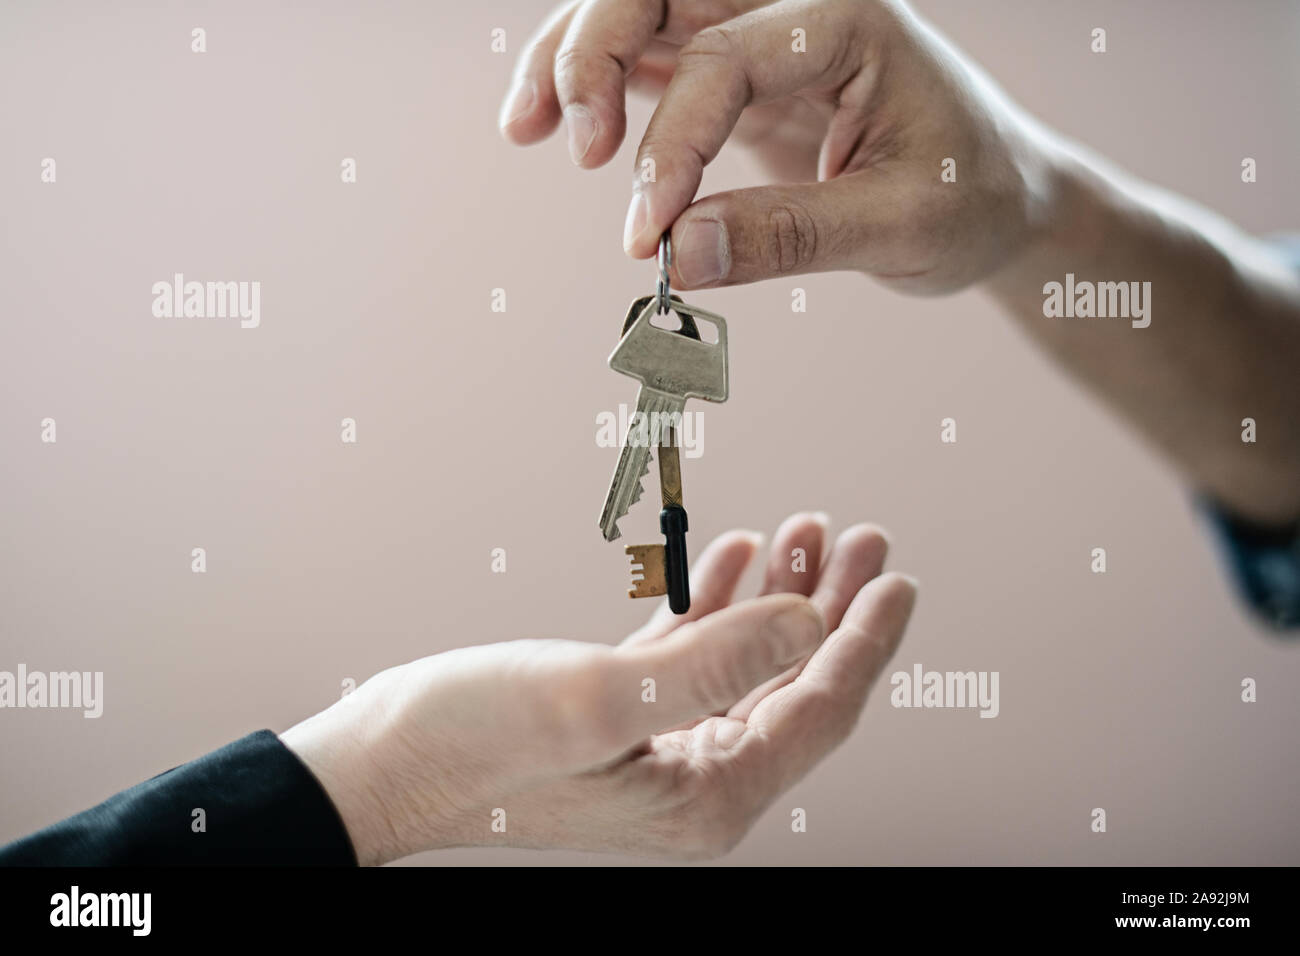 Hands with keys Stock Photo